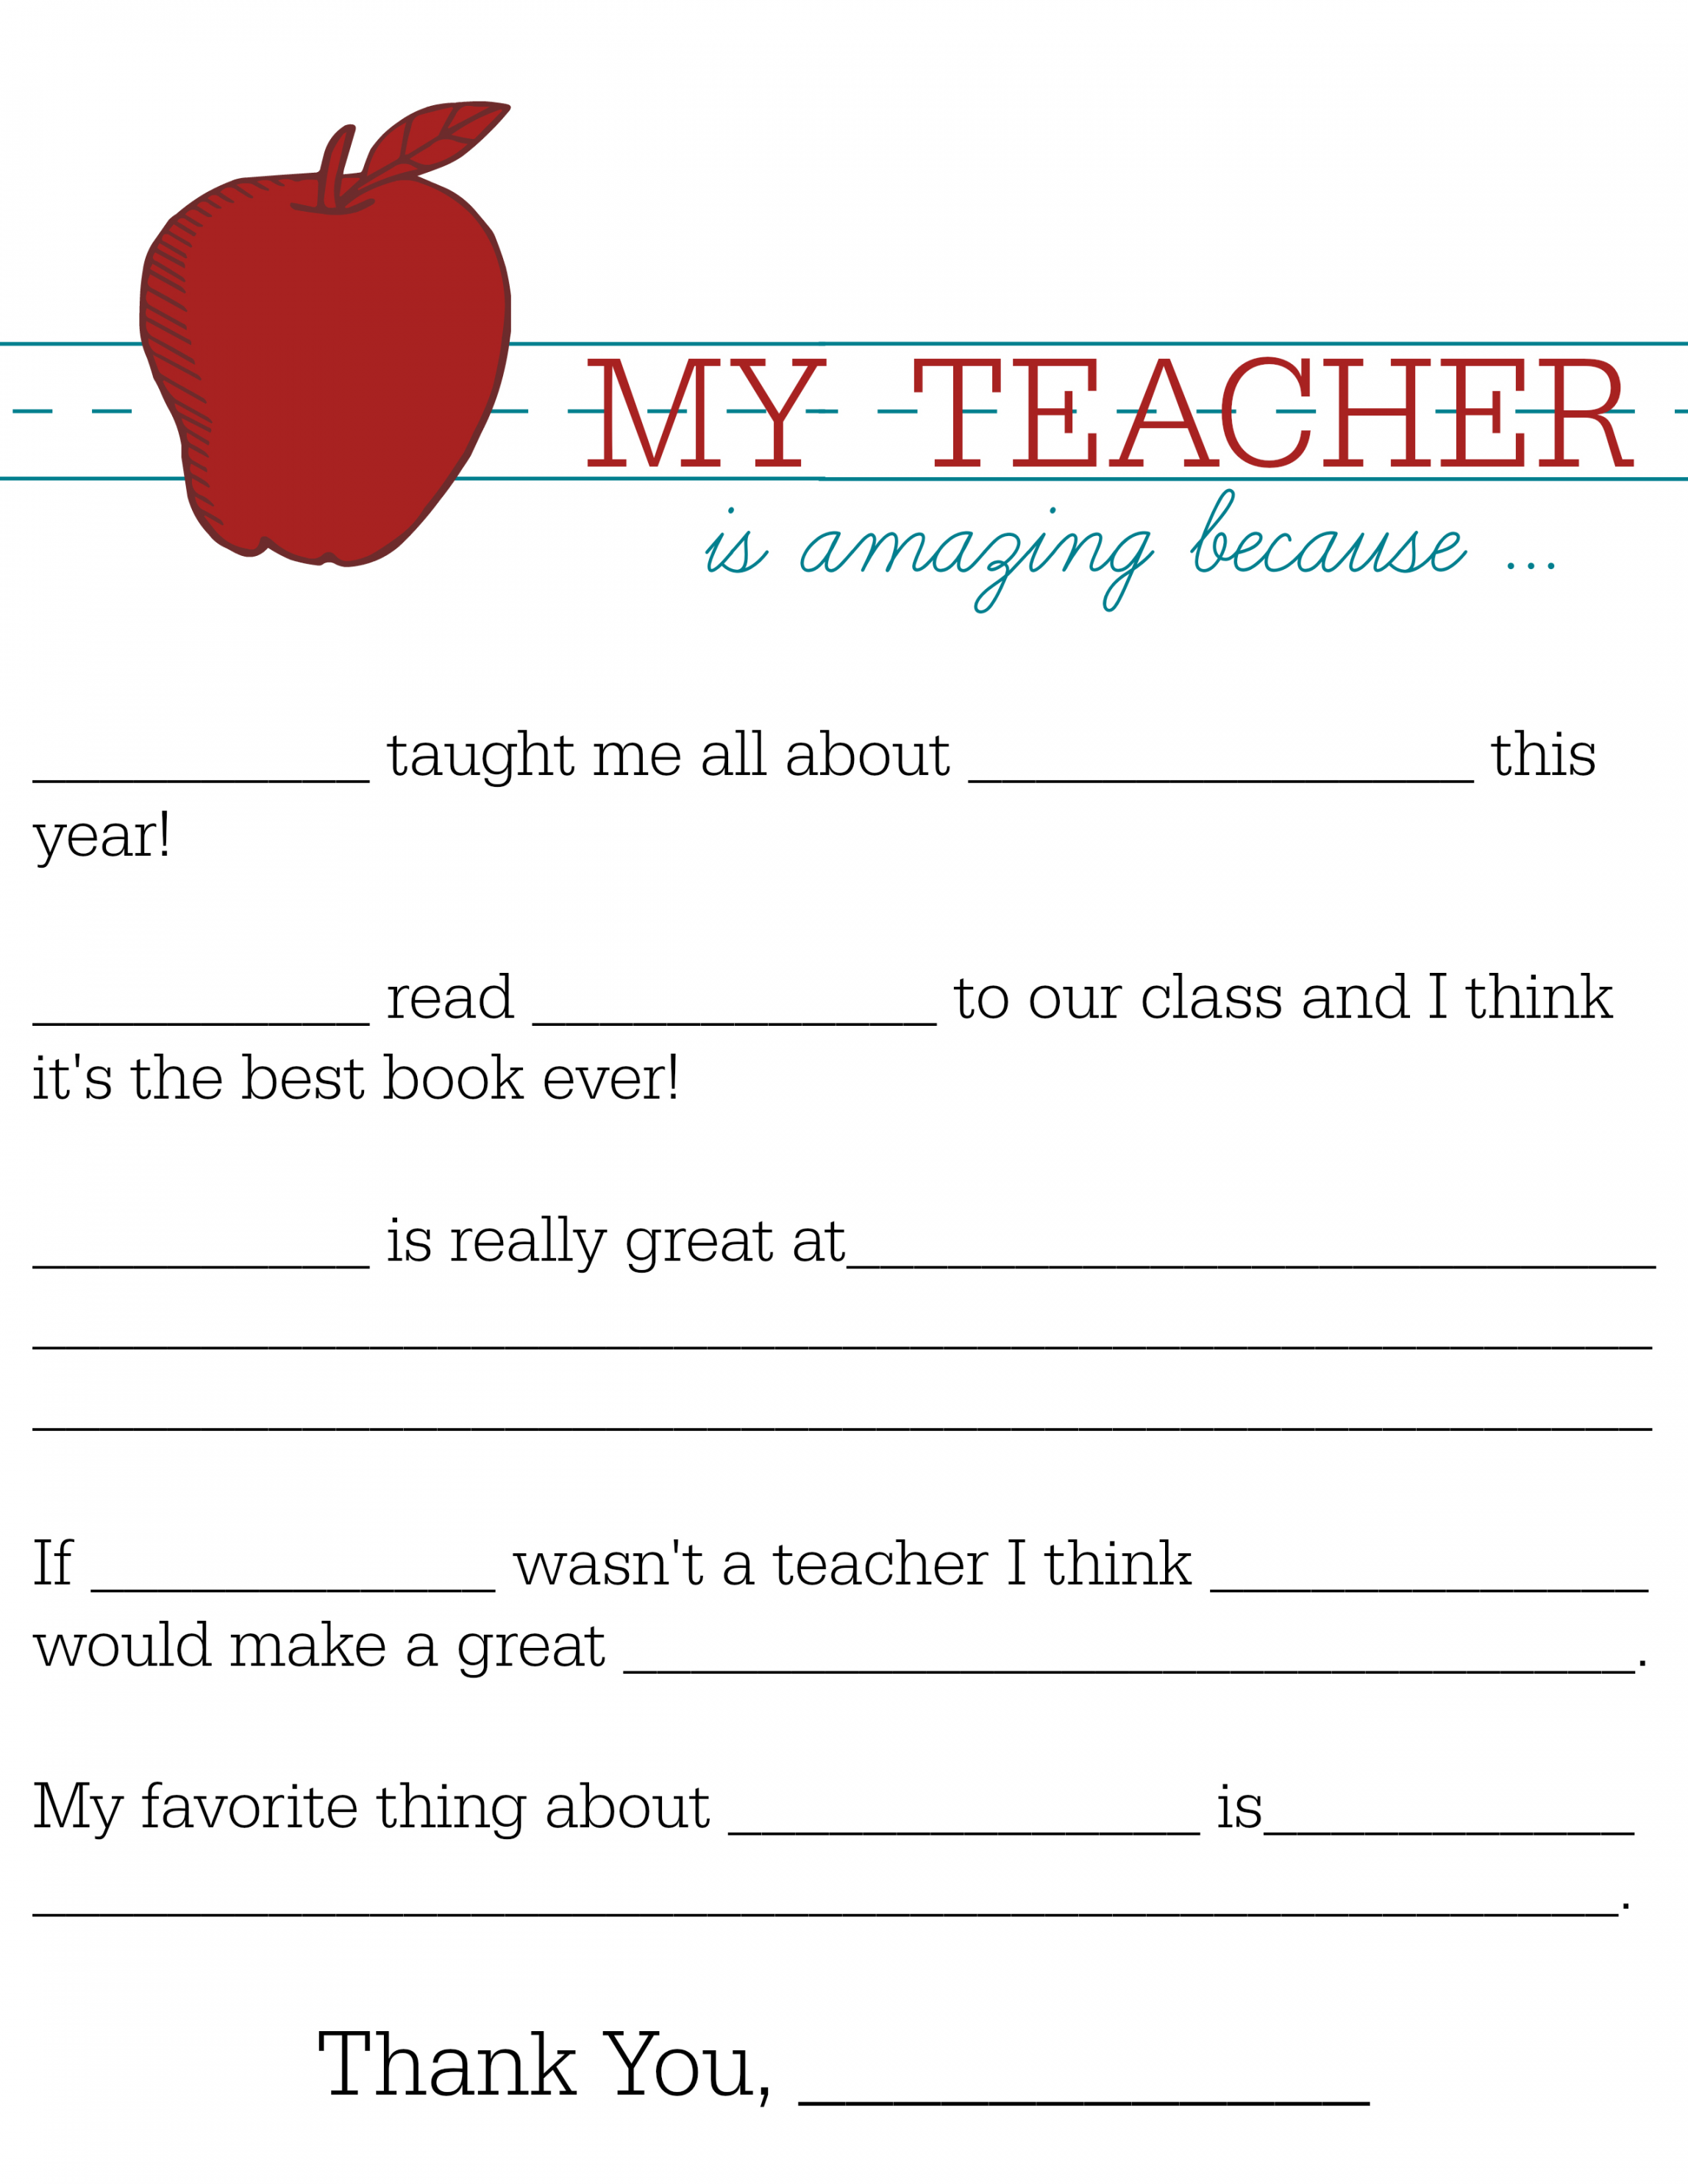 All About My Teacher - FREE Printables - All About My Teacher Free Printable